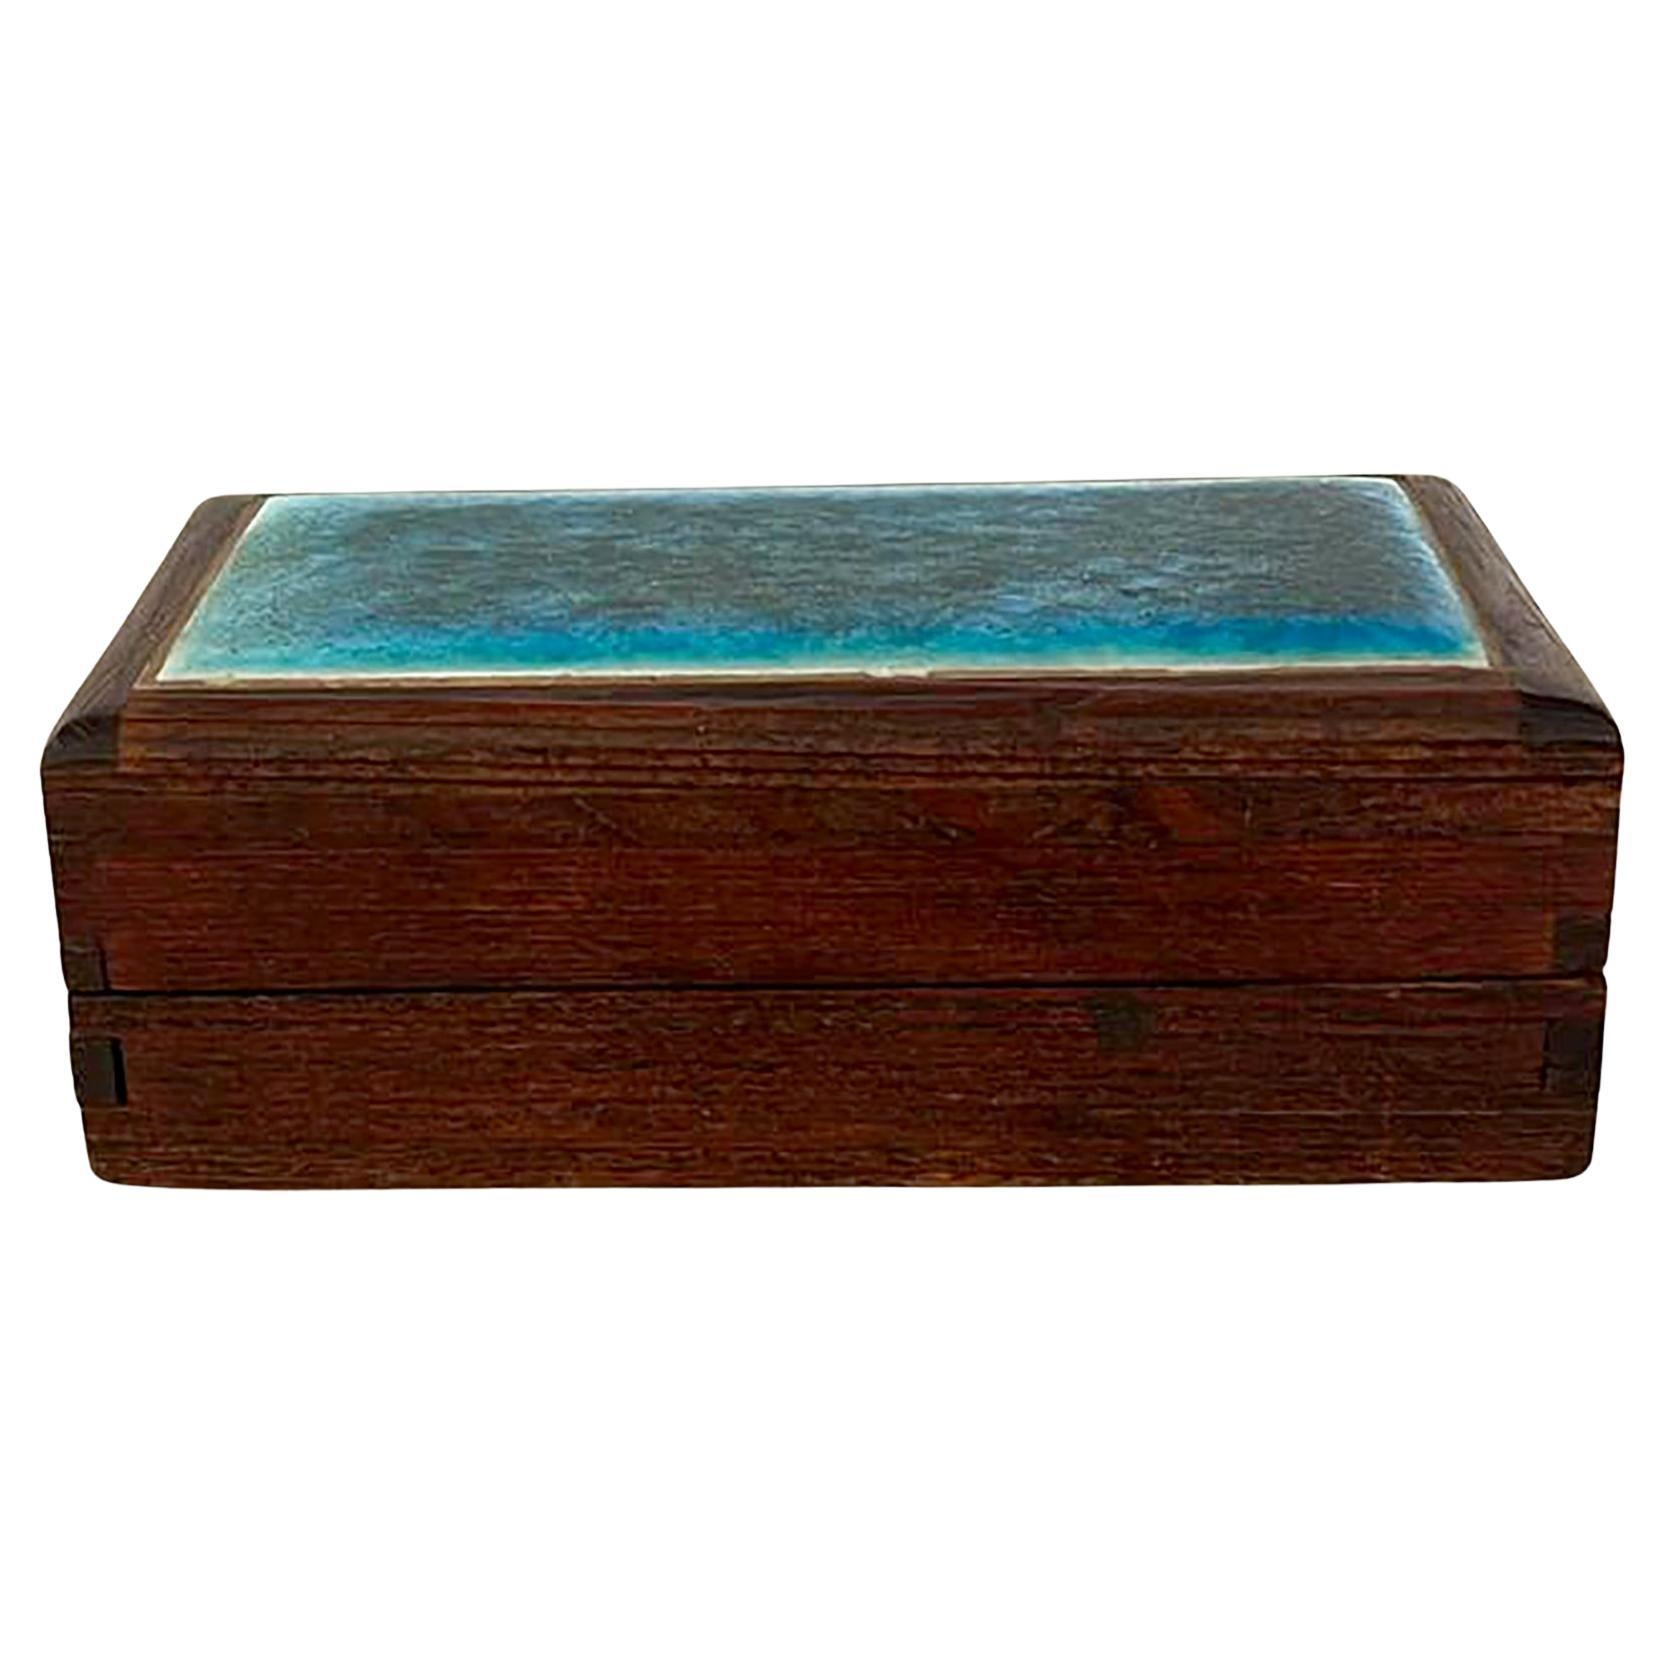 Ceramic Doyle Lane Blue Craquelure Tile Set in Hand Made Rosewood Box  For Sale